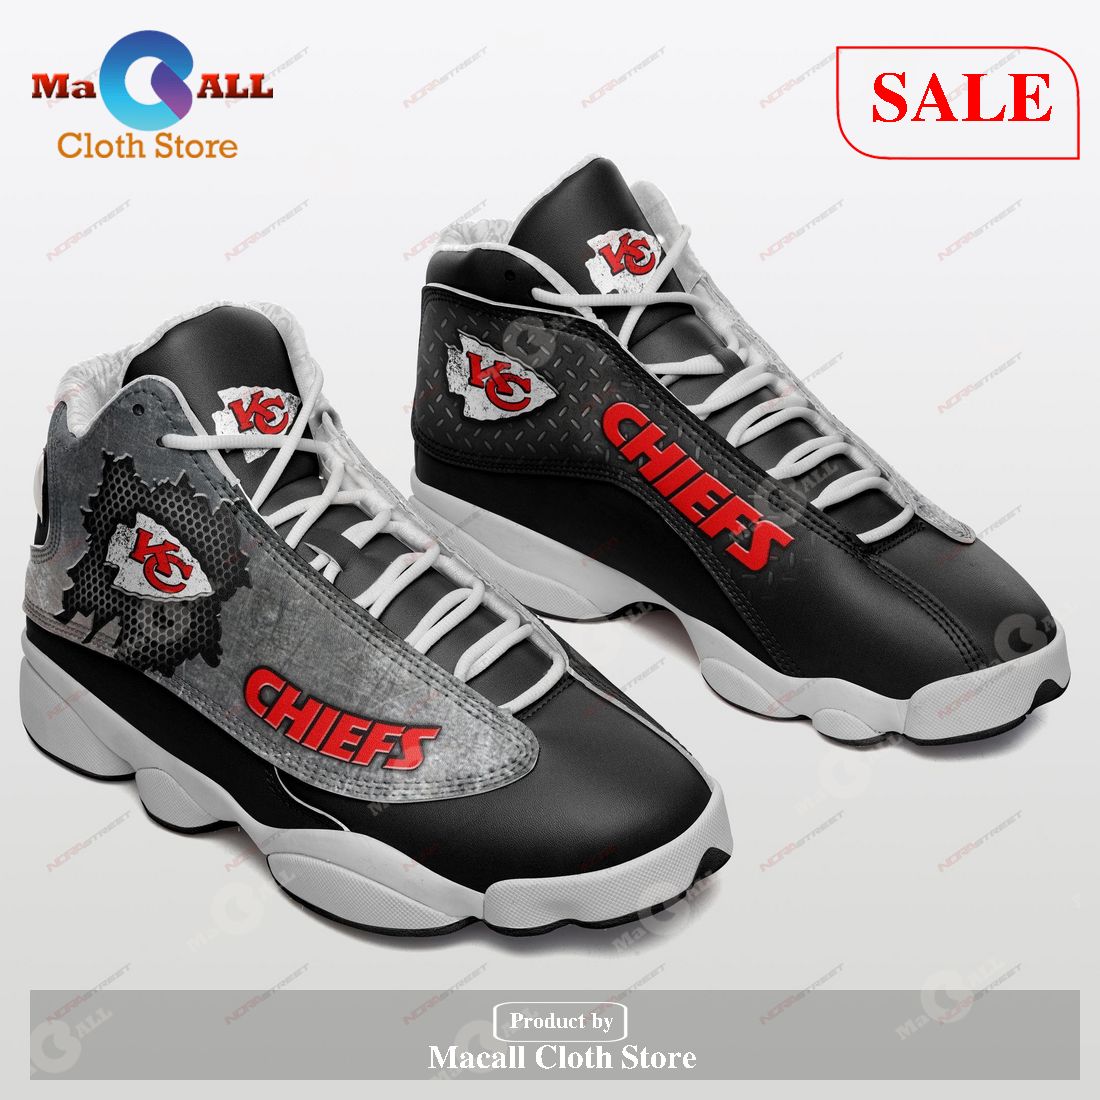 SALE] Kansas Chiefs Air Jordan 13 Sneakers Sport Shoes Full Size Macall Cloth Store - Destination for fashionistas